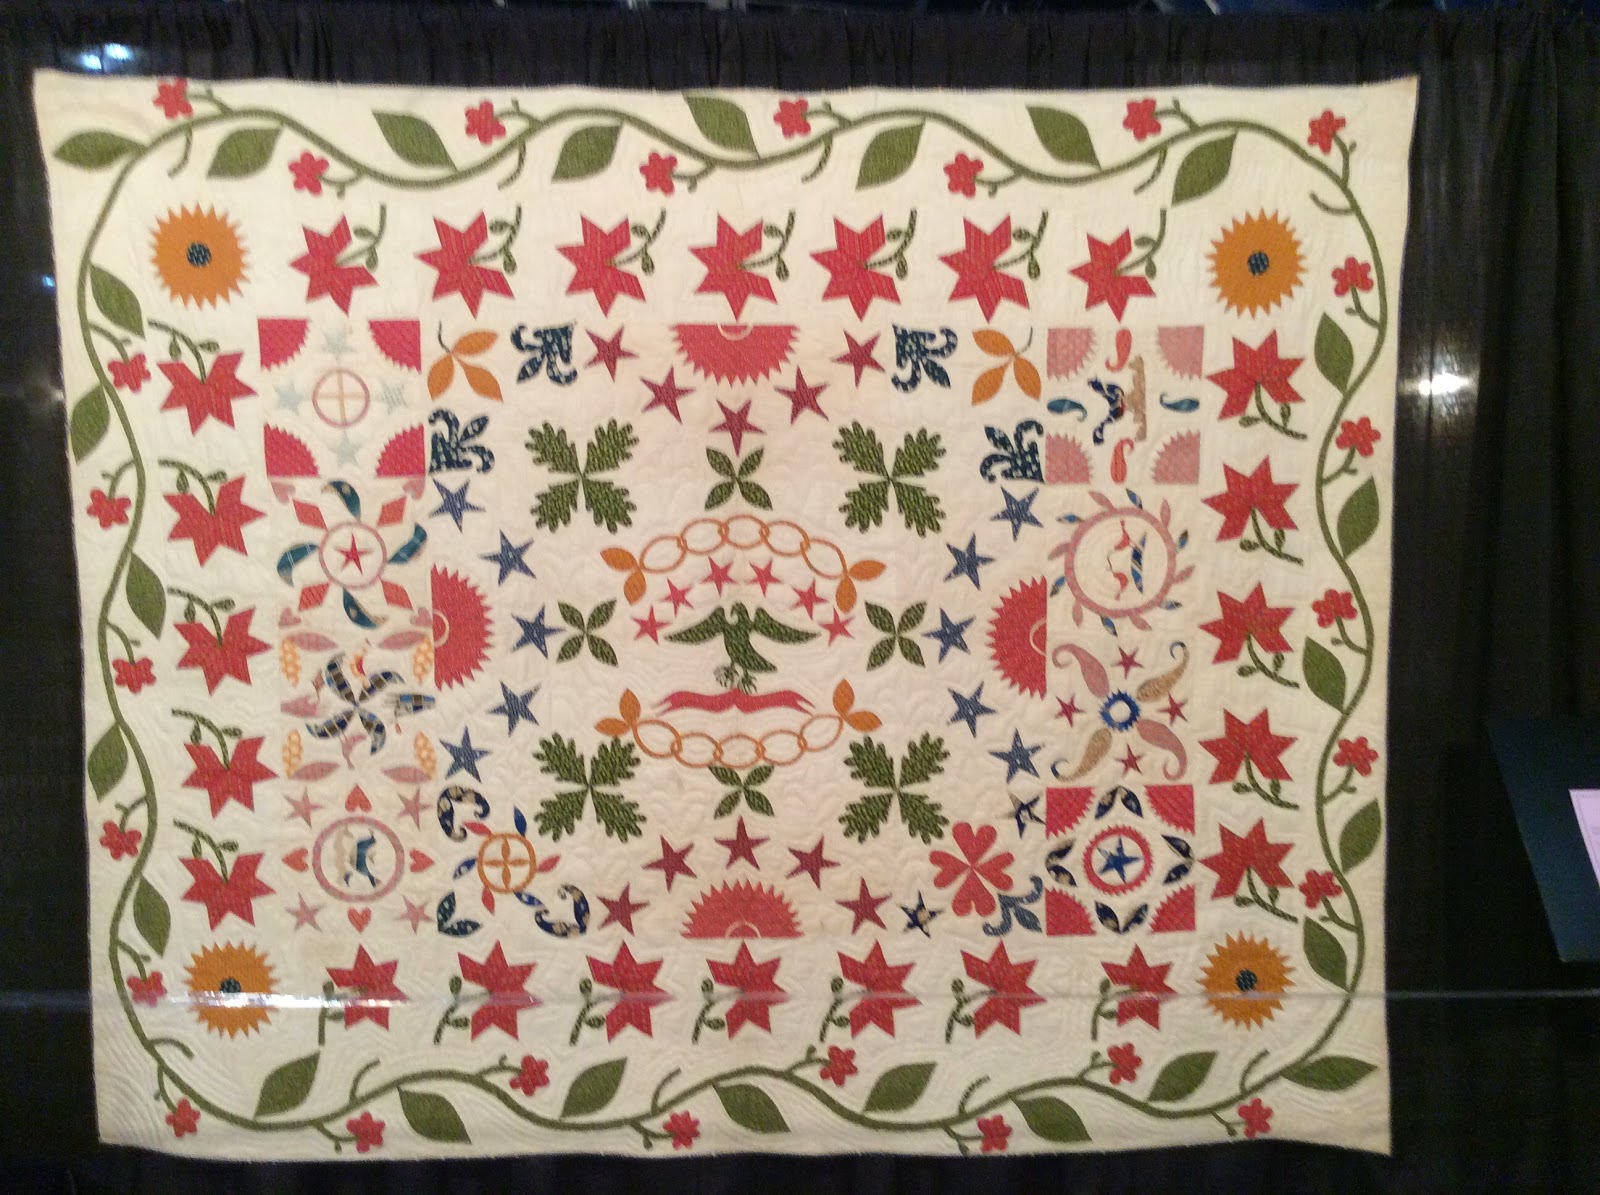 Sew Many Quilts - Too Little Time: Mary Koval's Antique Quilts At Houston